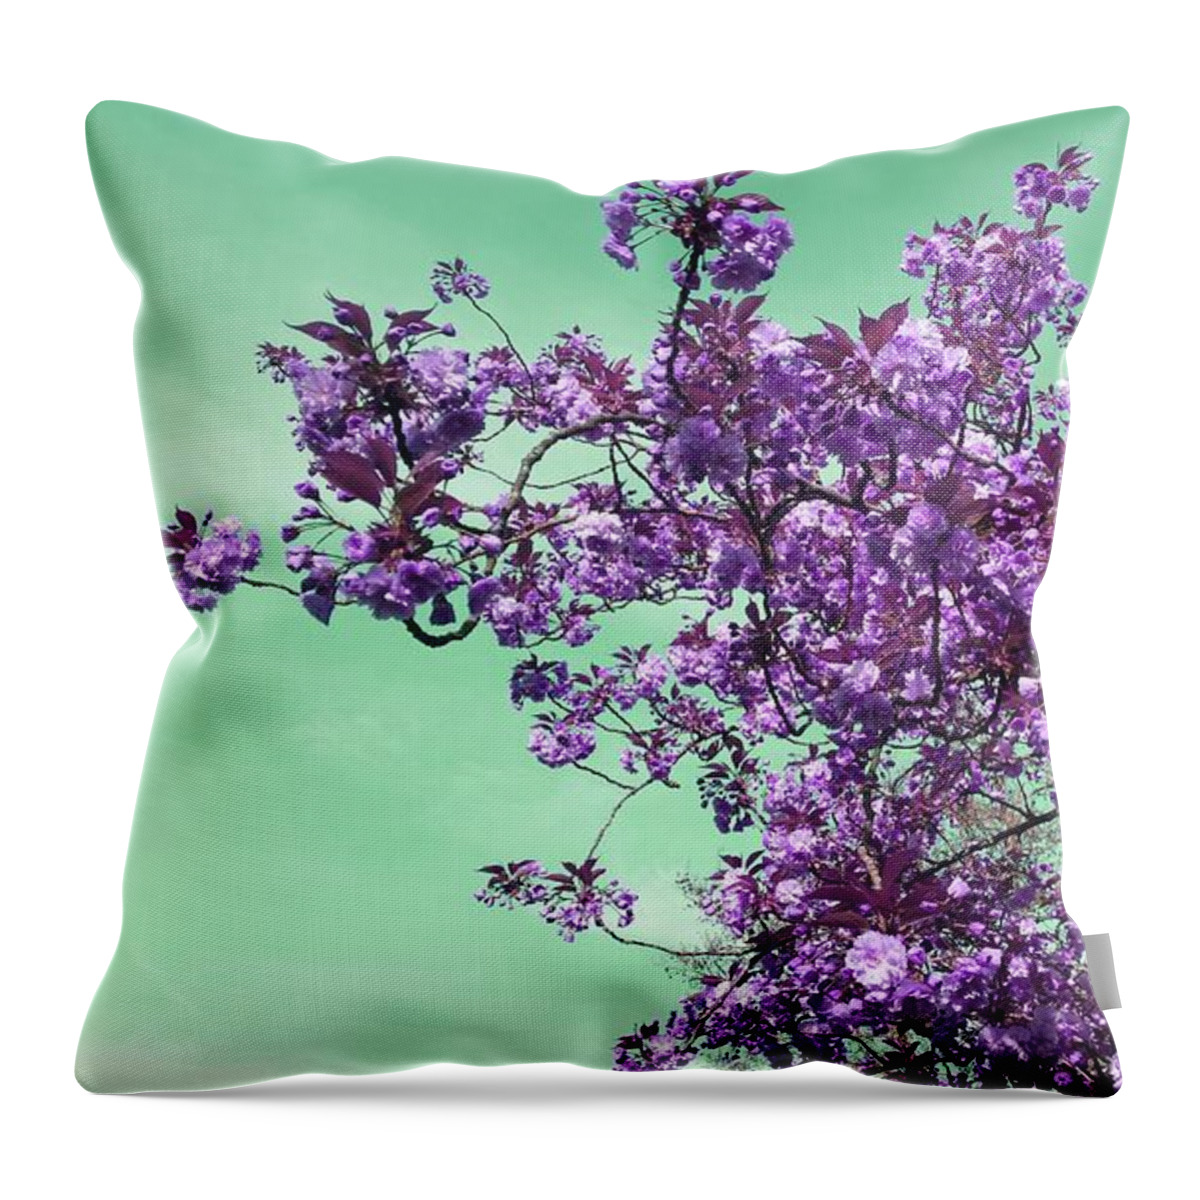 Fantasy Throw Pillow featuring the photograph Blossom O'clock In Violet by Rowena Tutty